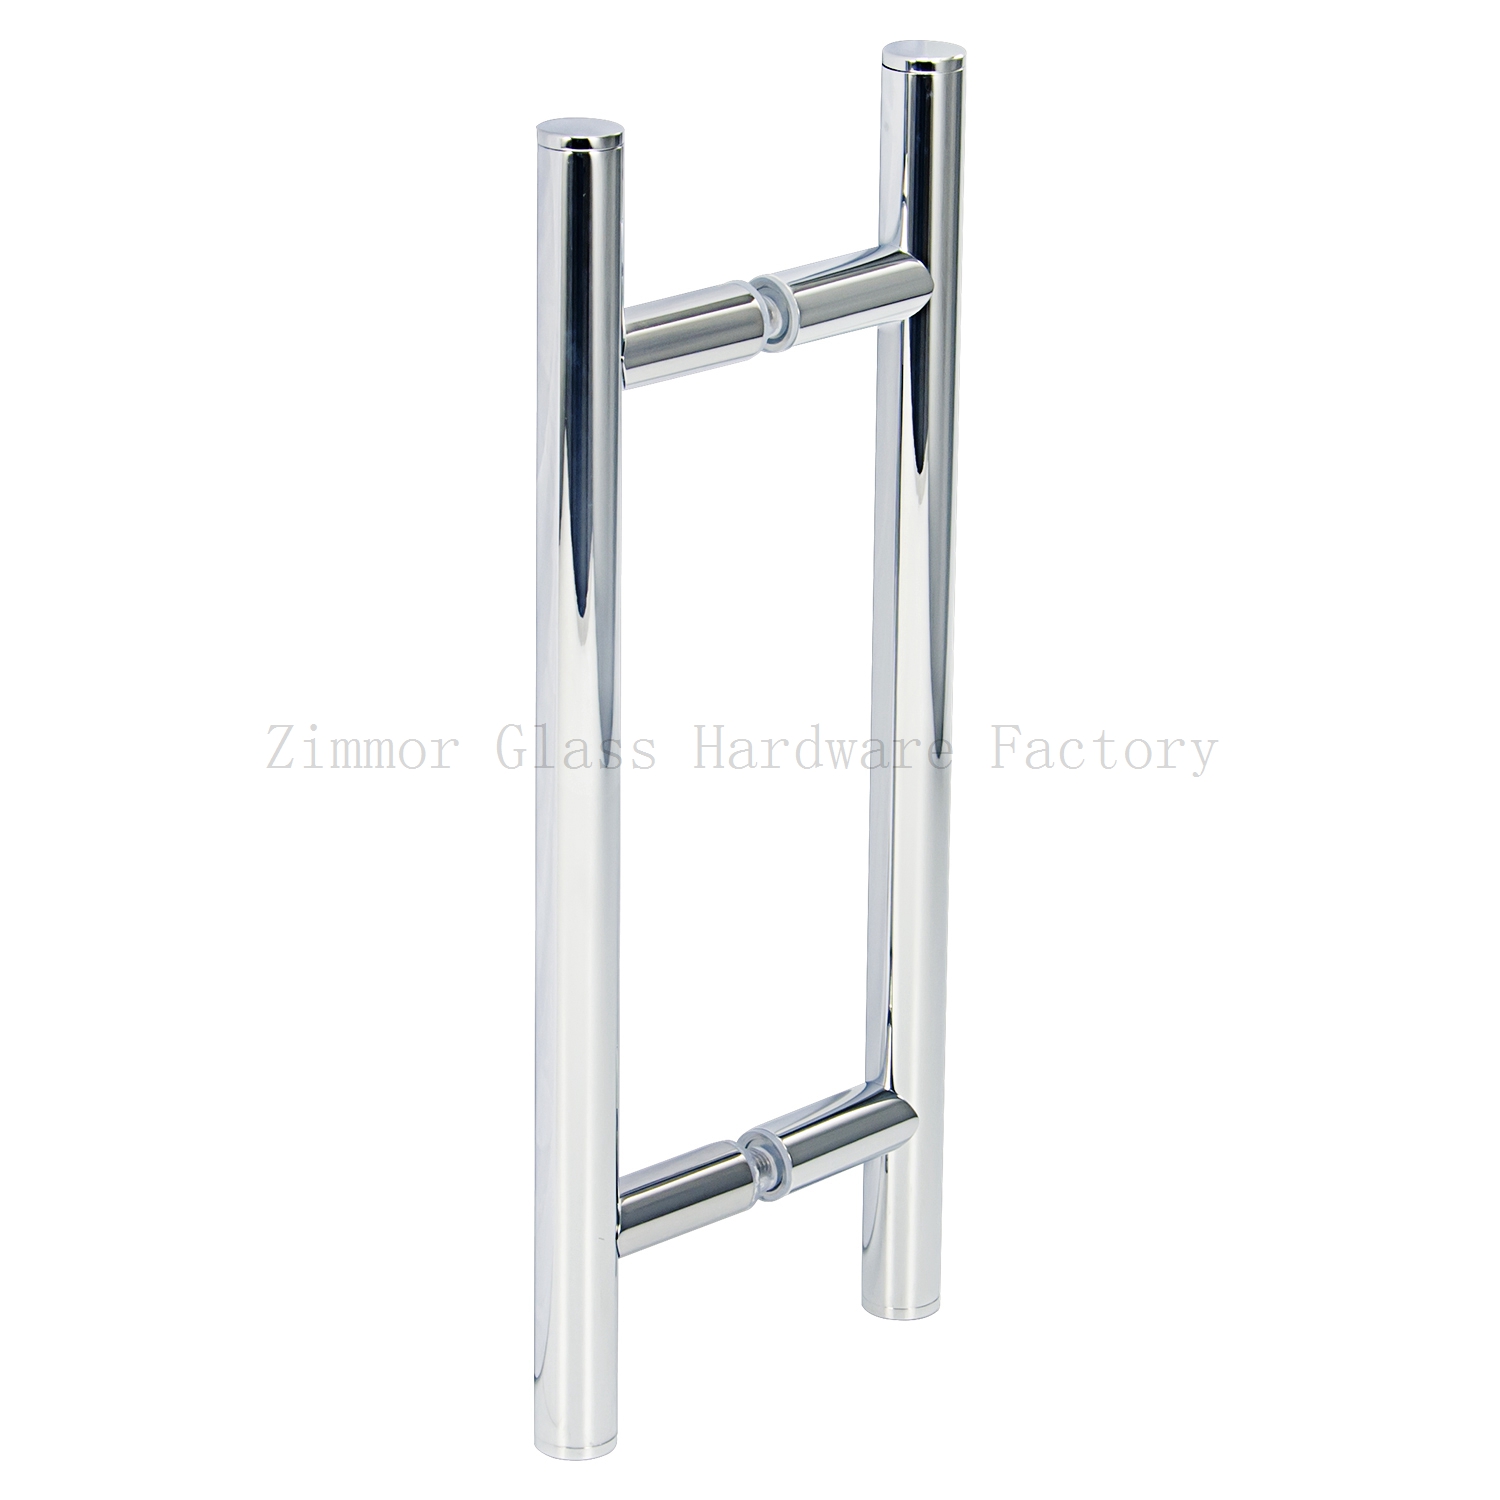 19mm Diameter Round Tubing Back To Back  Shower Door Pull Handle Without  Washers